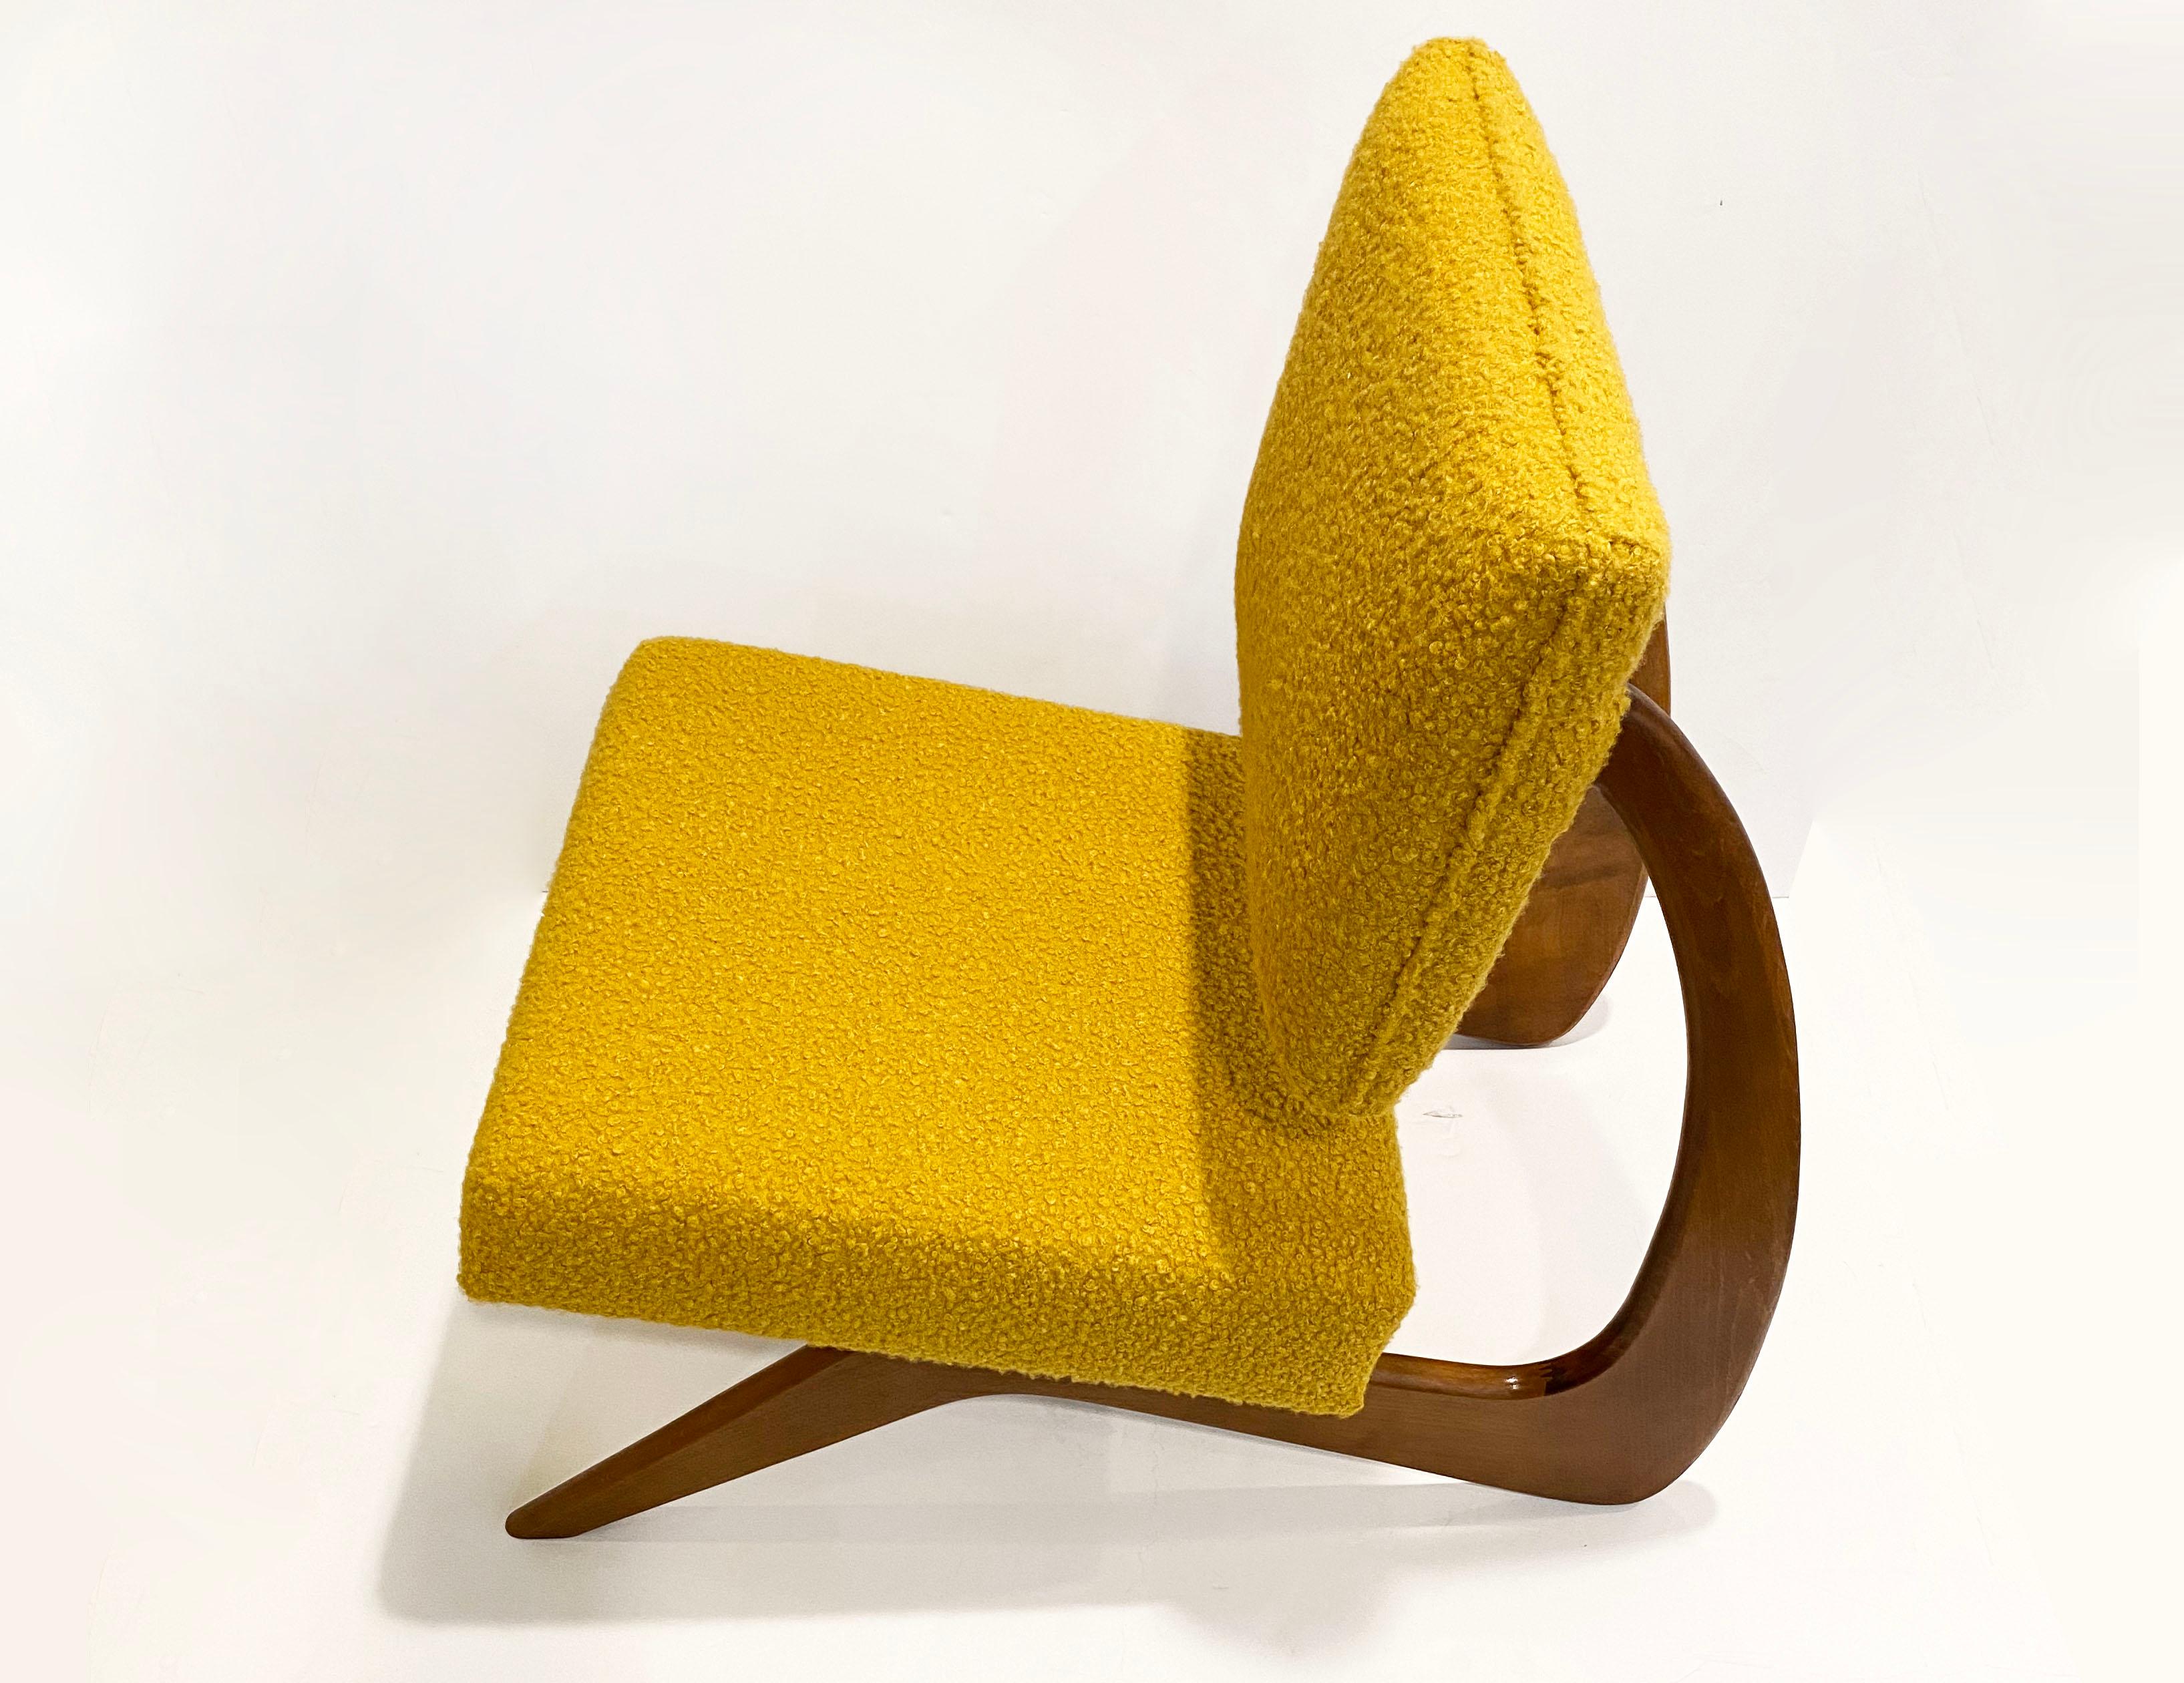 Bespoke Italian Pair of Boucle Mustard Yellow Aero Curved Beech Lounge Chairs For Sale 4